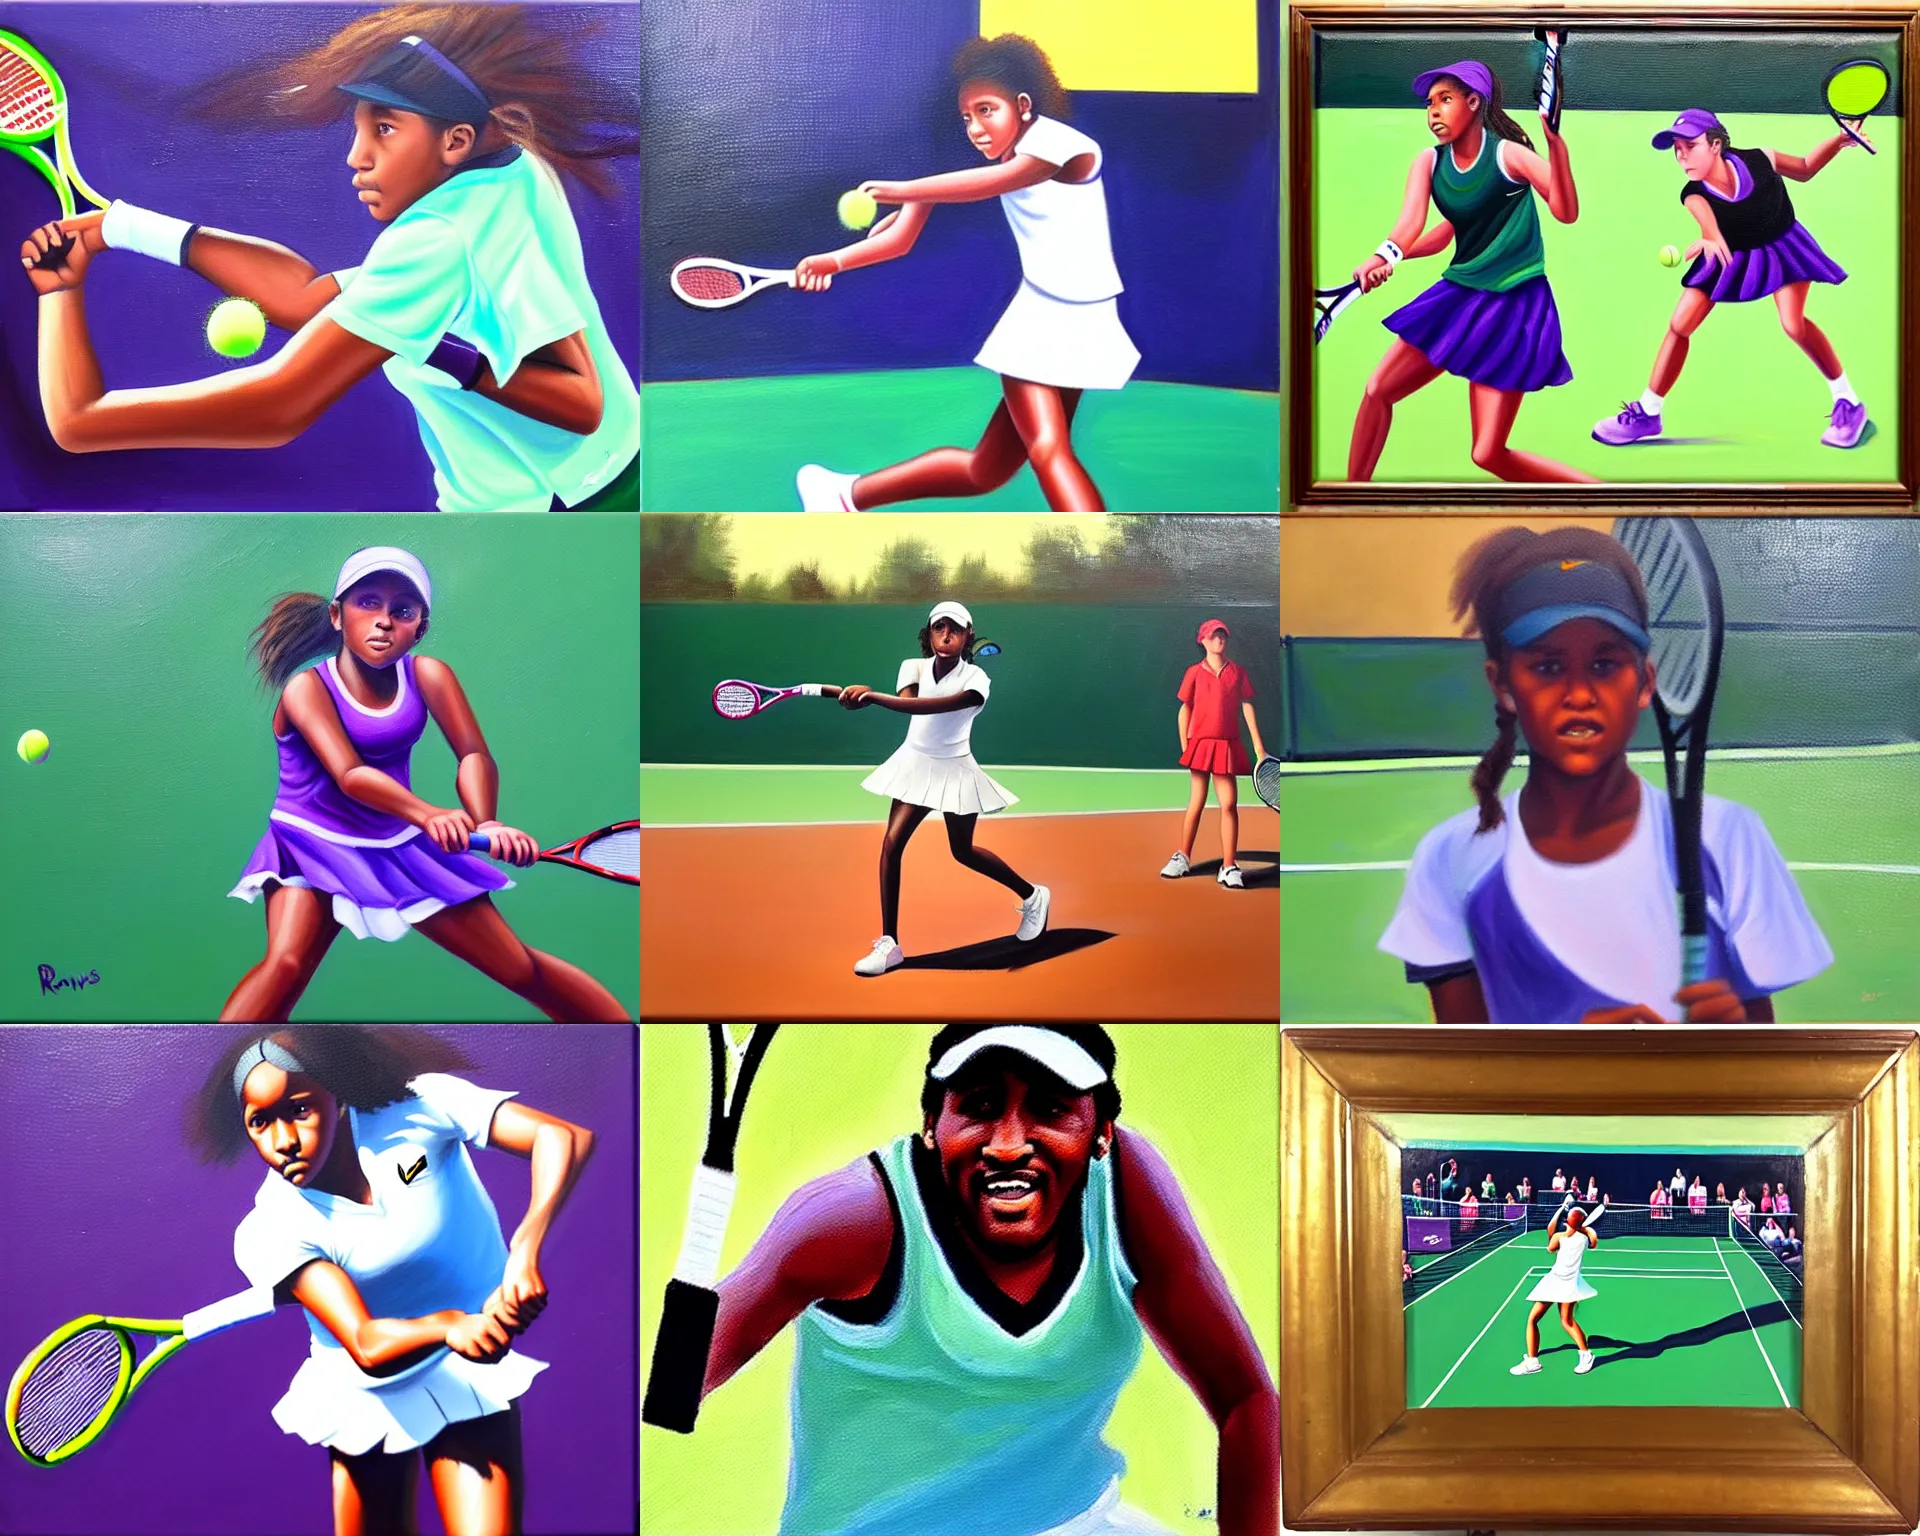 Prompt: ray lewis playing tennis high school girls, oil on canvas